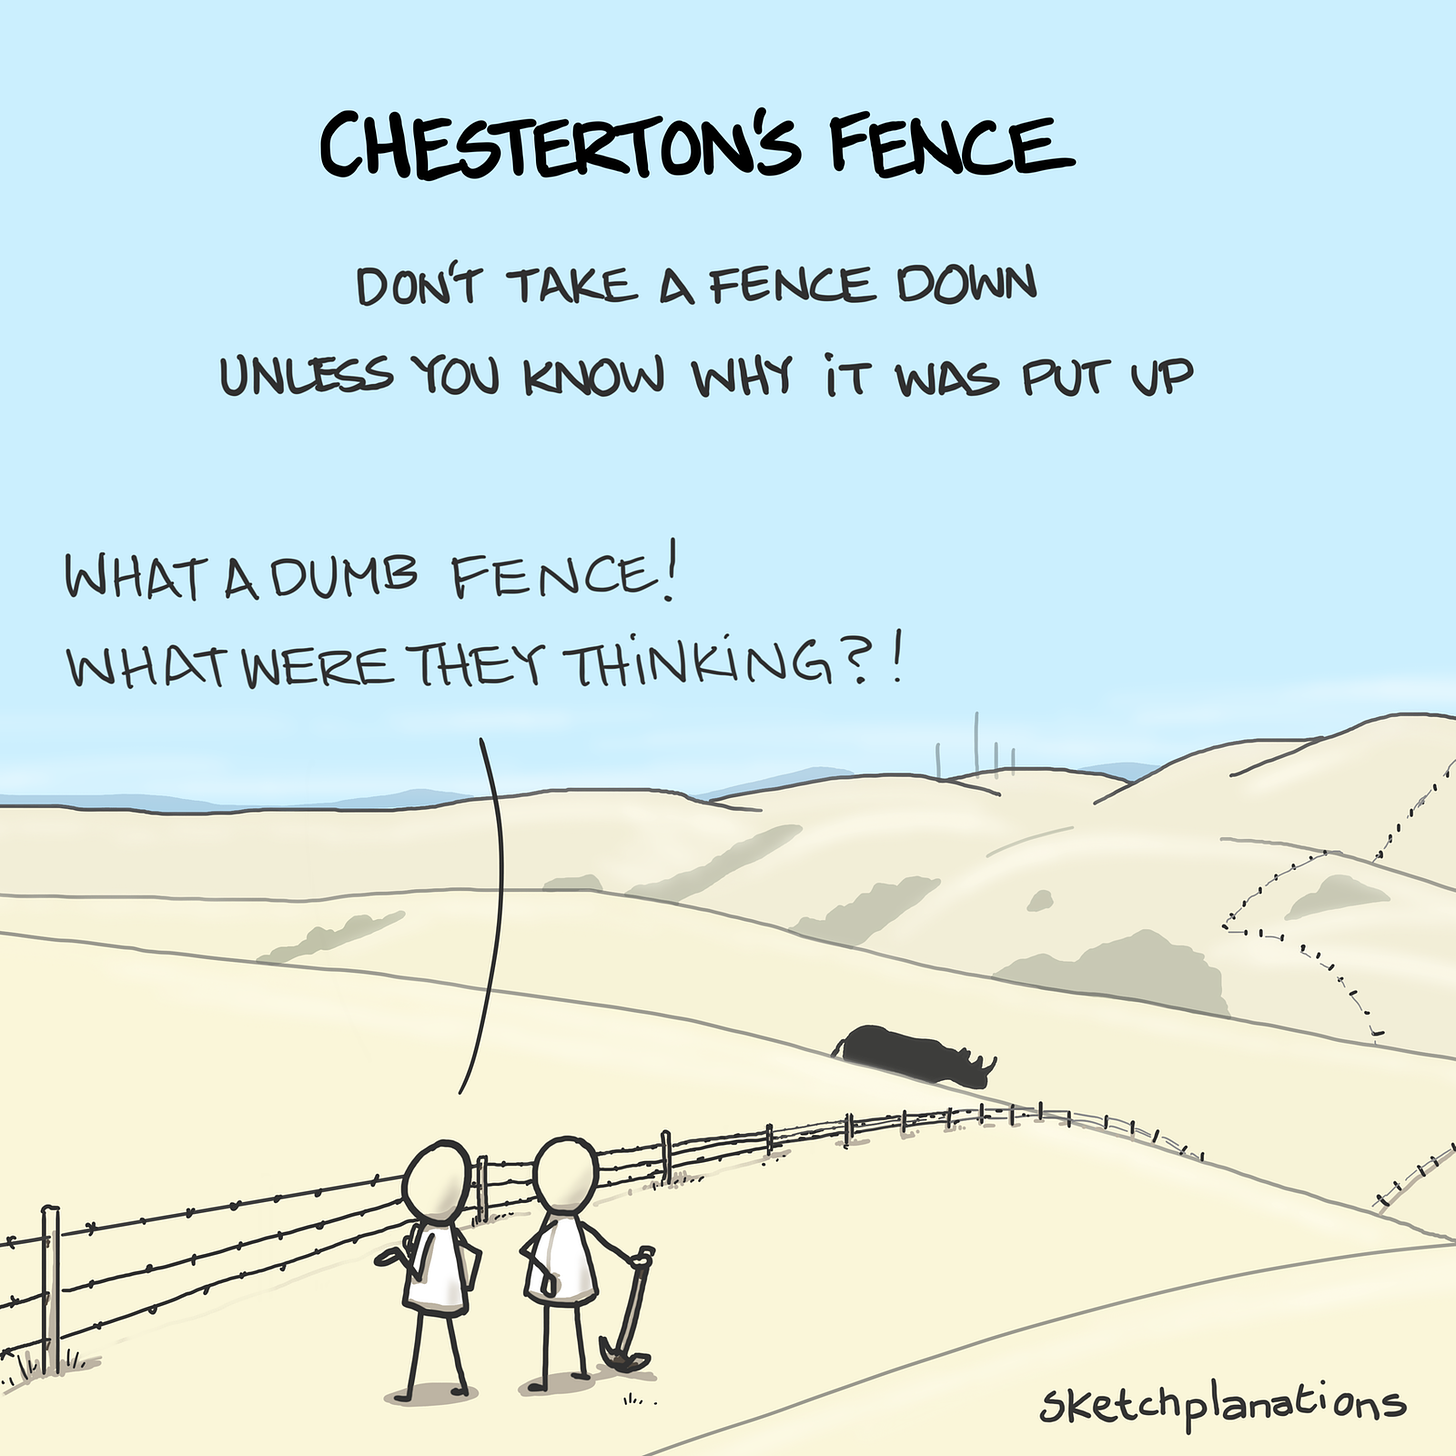 Chesterton's fence - Sketchplanations